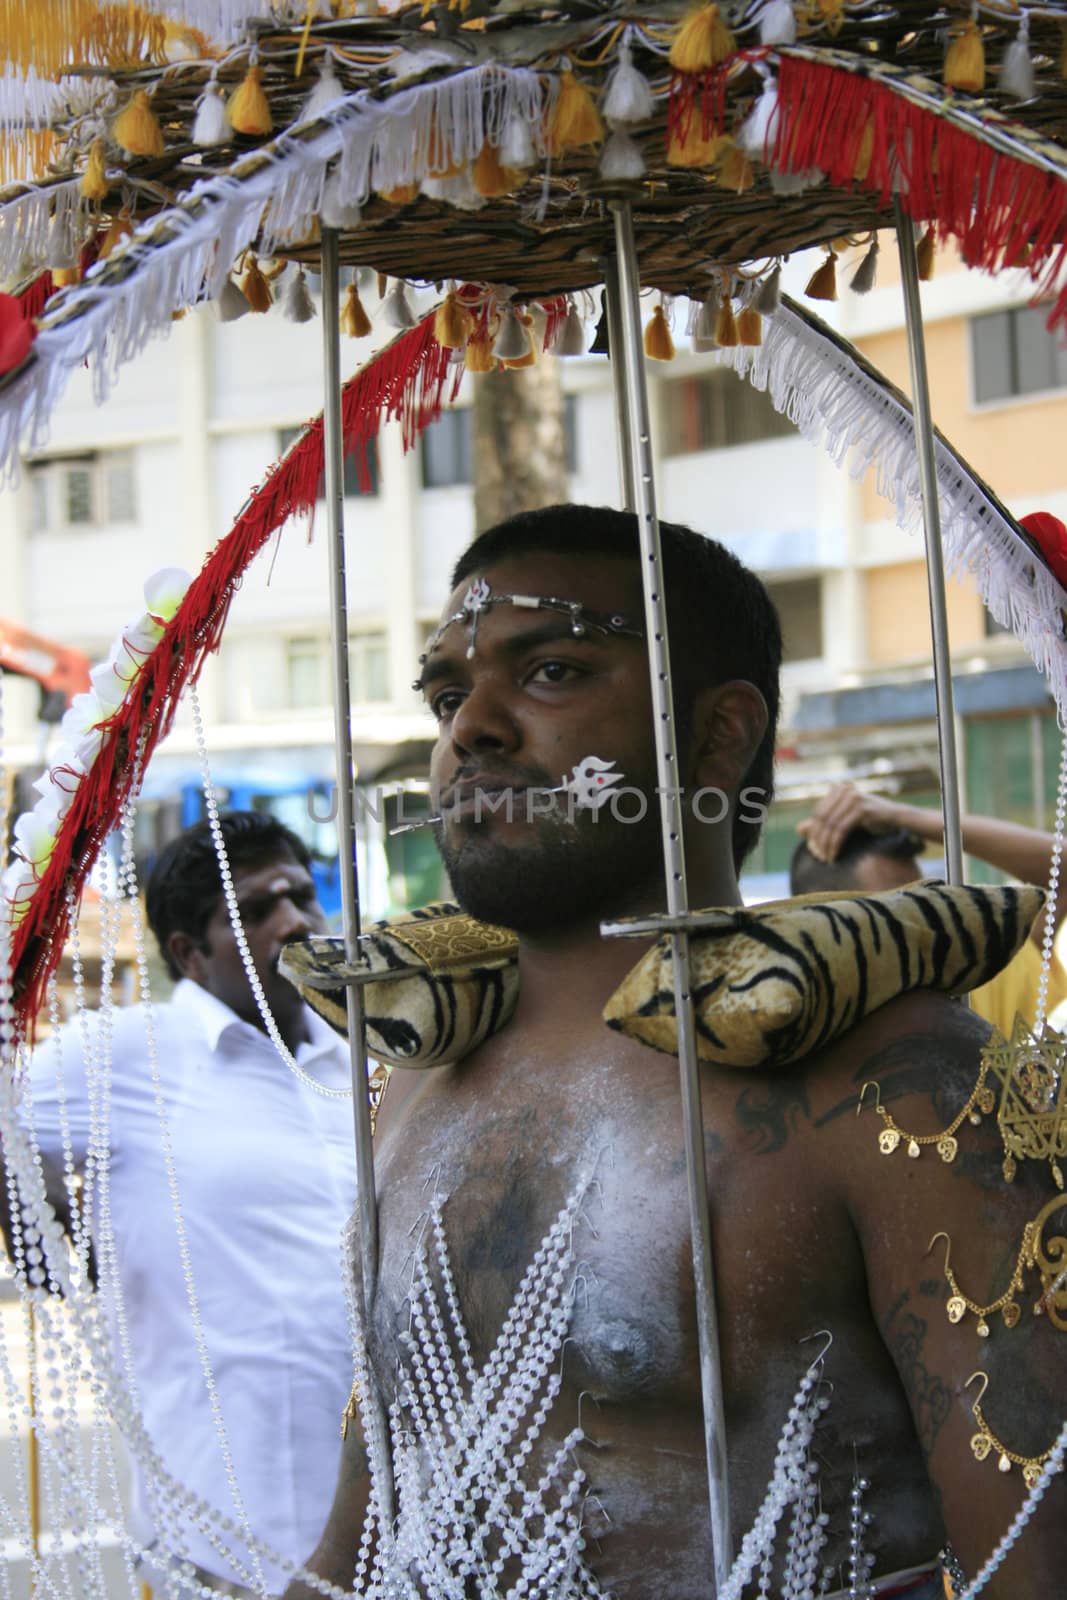 Thaipusam One of the annual attractive even in Singapore. Carry Kavadi is the best offering in Thaipusam 2009.